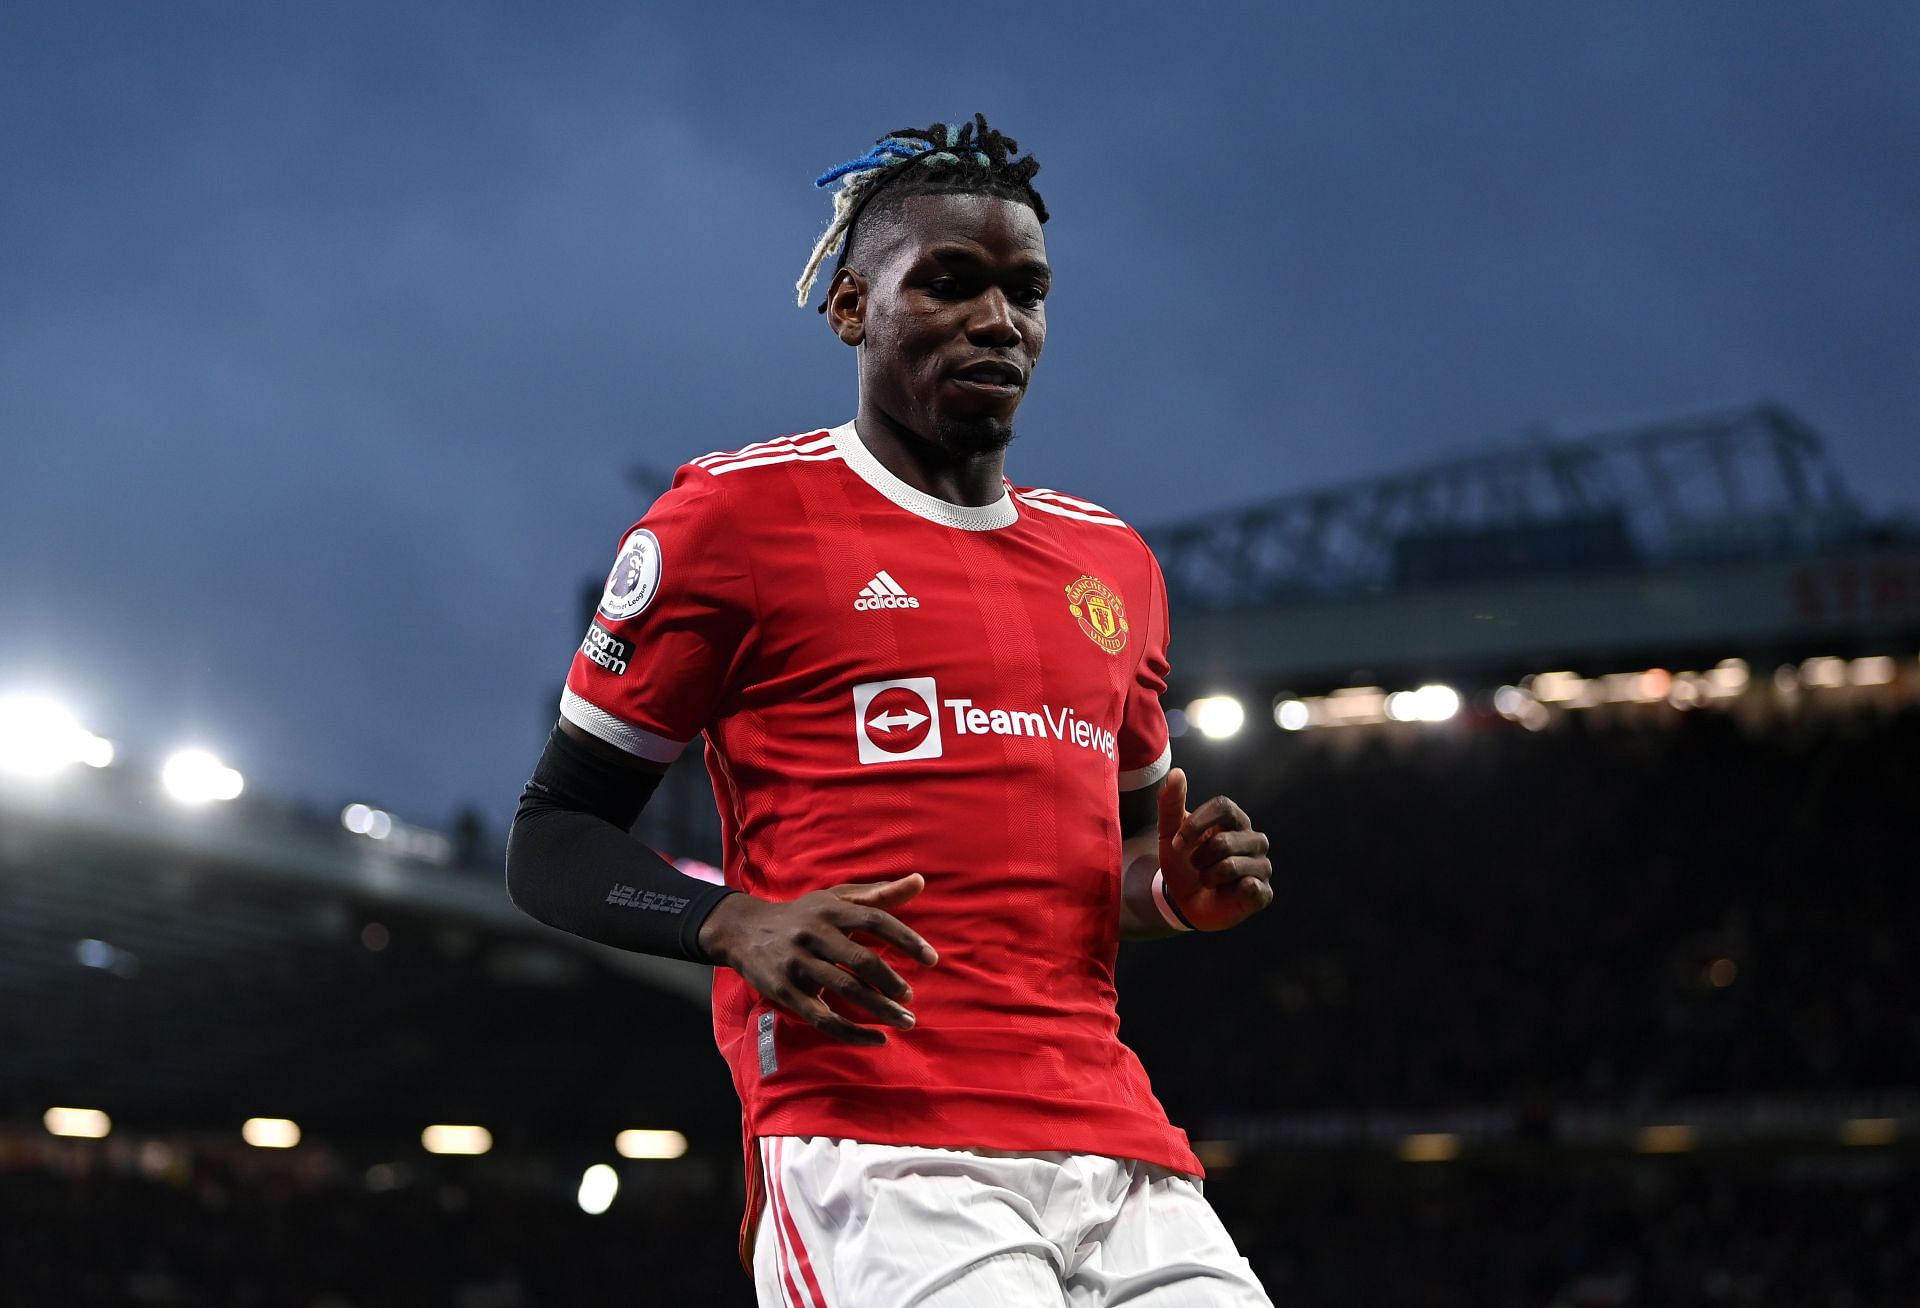 Paddy Kenny has advised Manchester United to cash in on Paul Pogba in January.